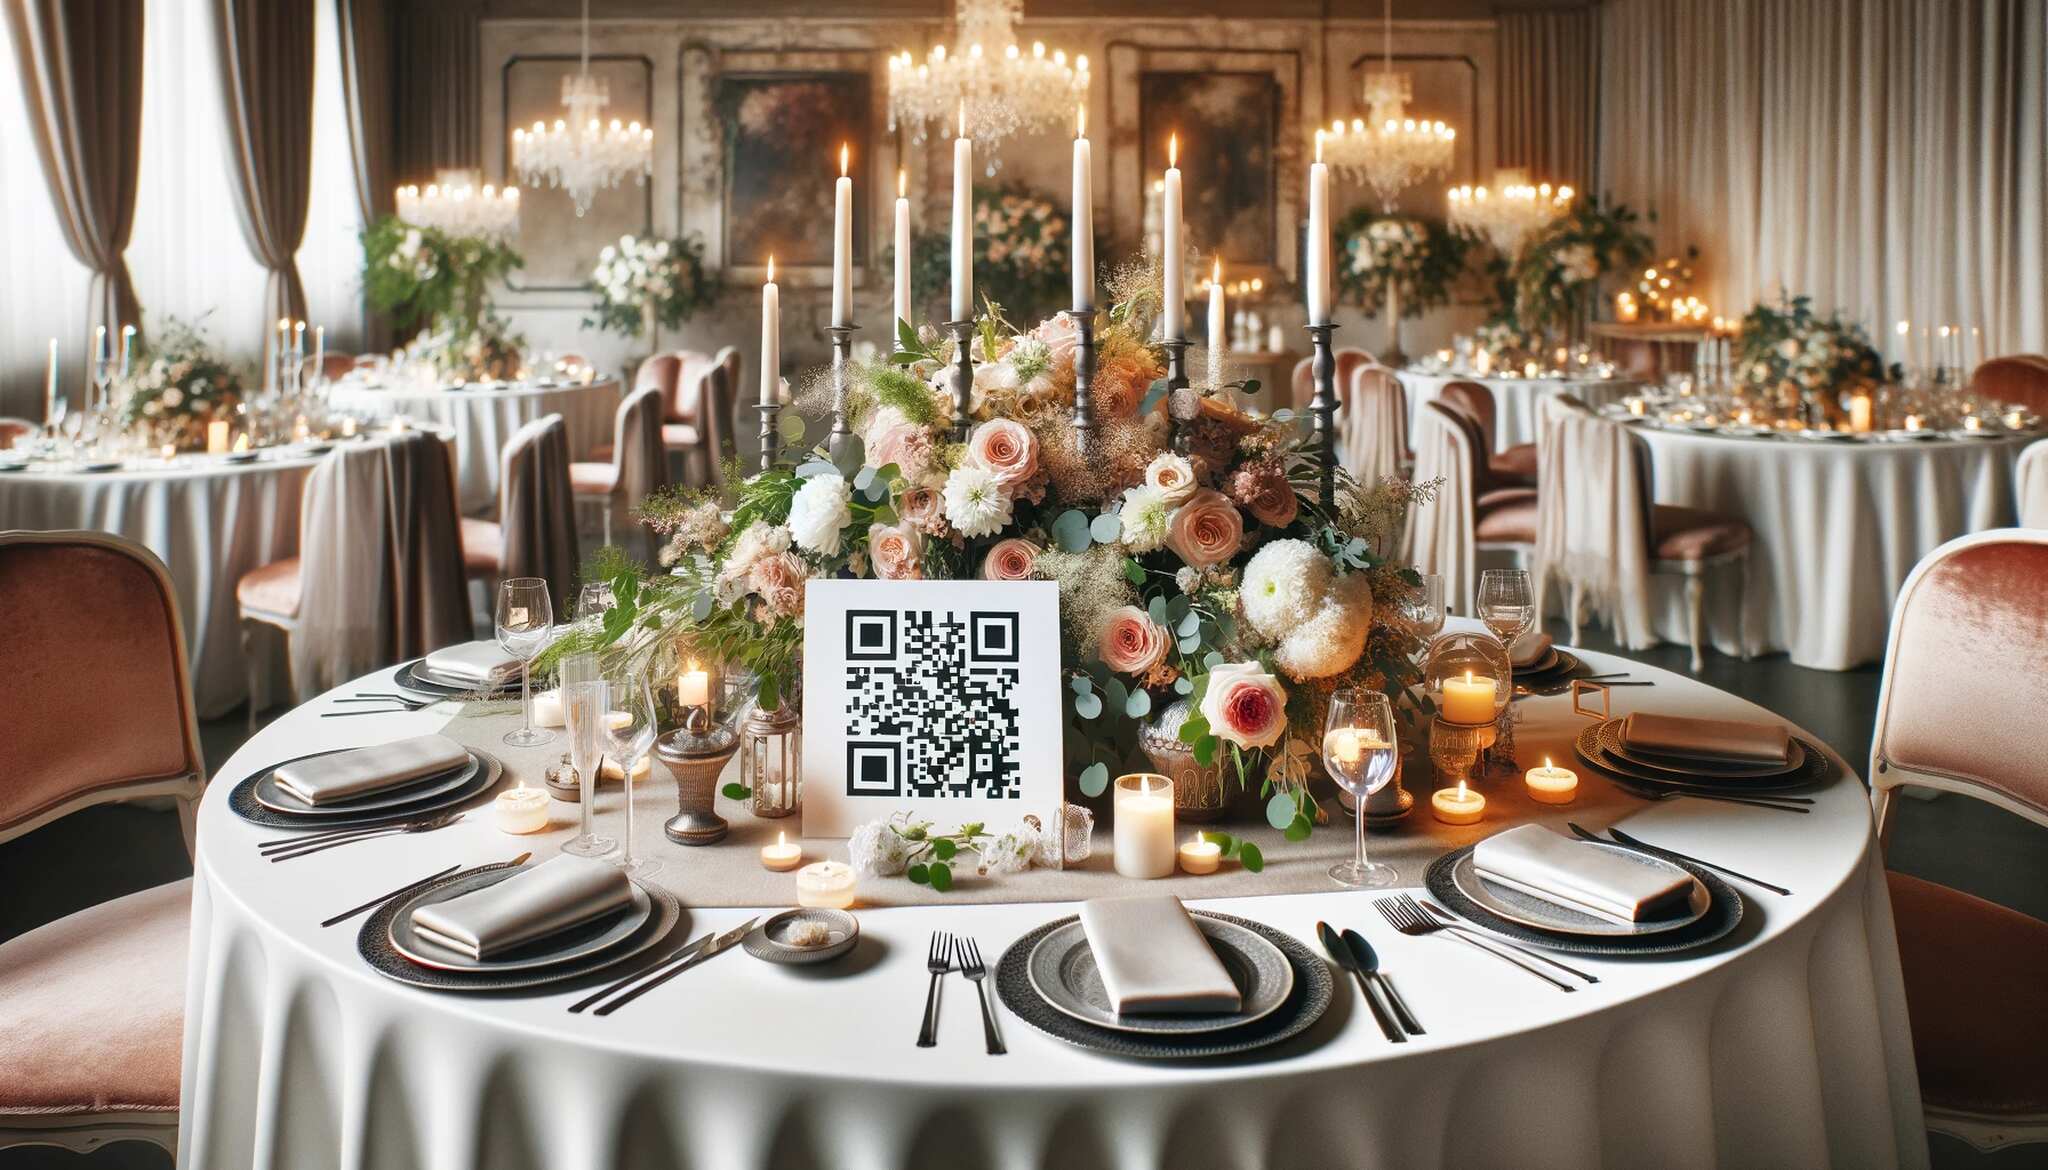 elegant wedding reception area with a qr code on table